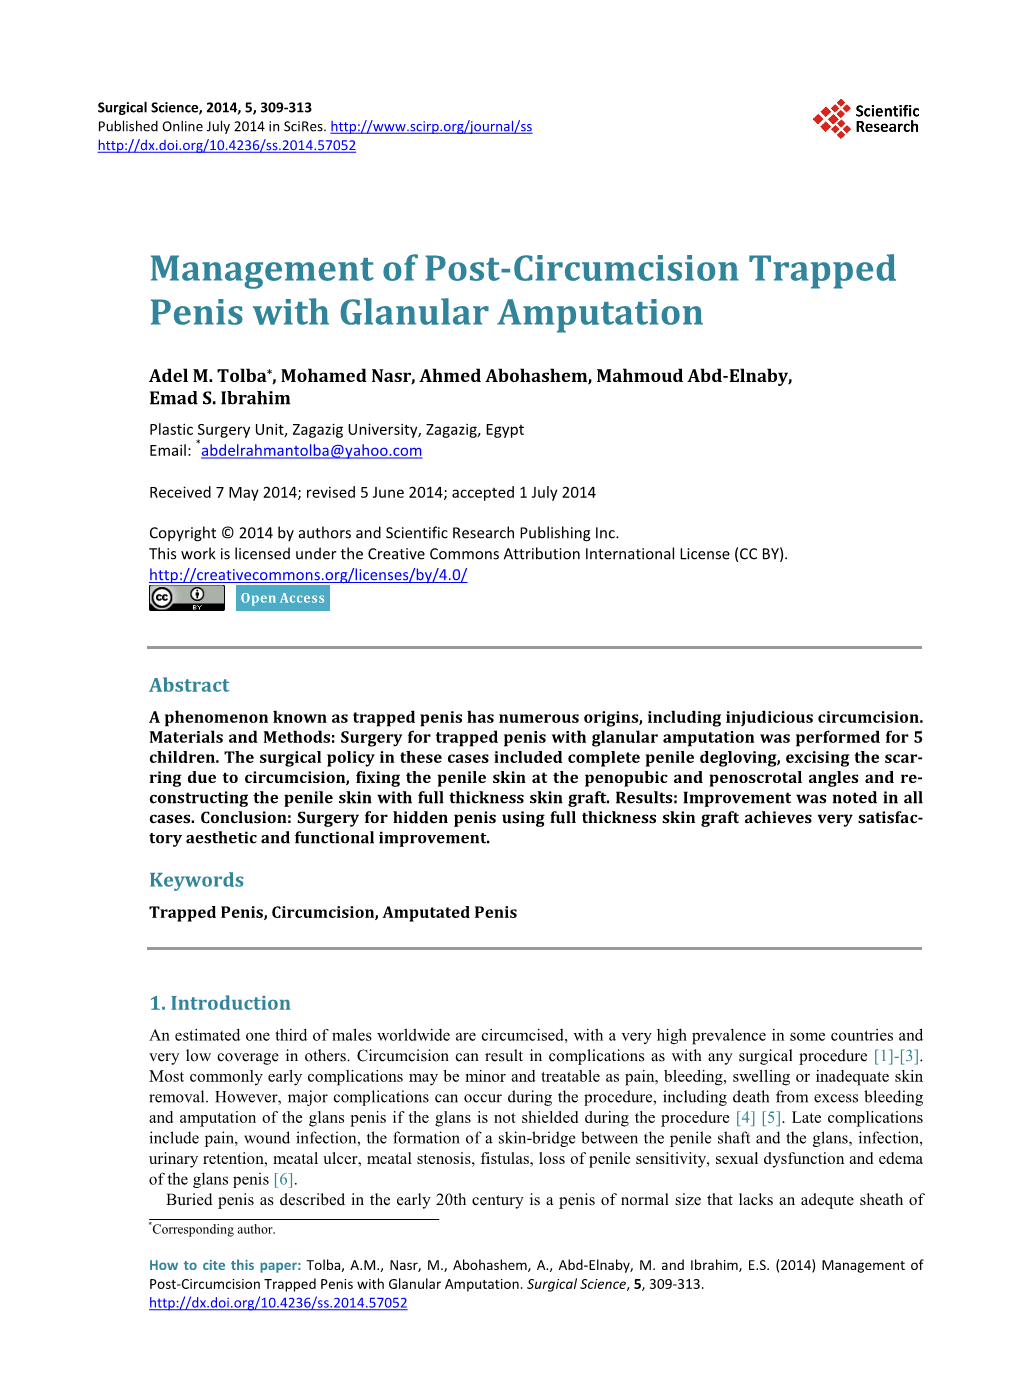 Management of Post-Circumcision Trapped Penis with Glanular Amputation